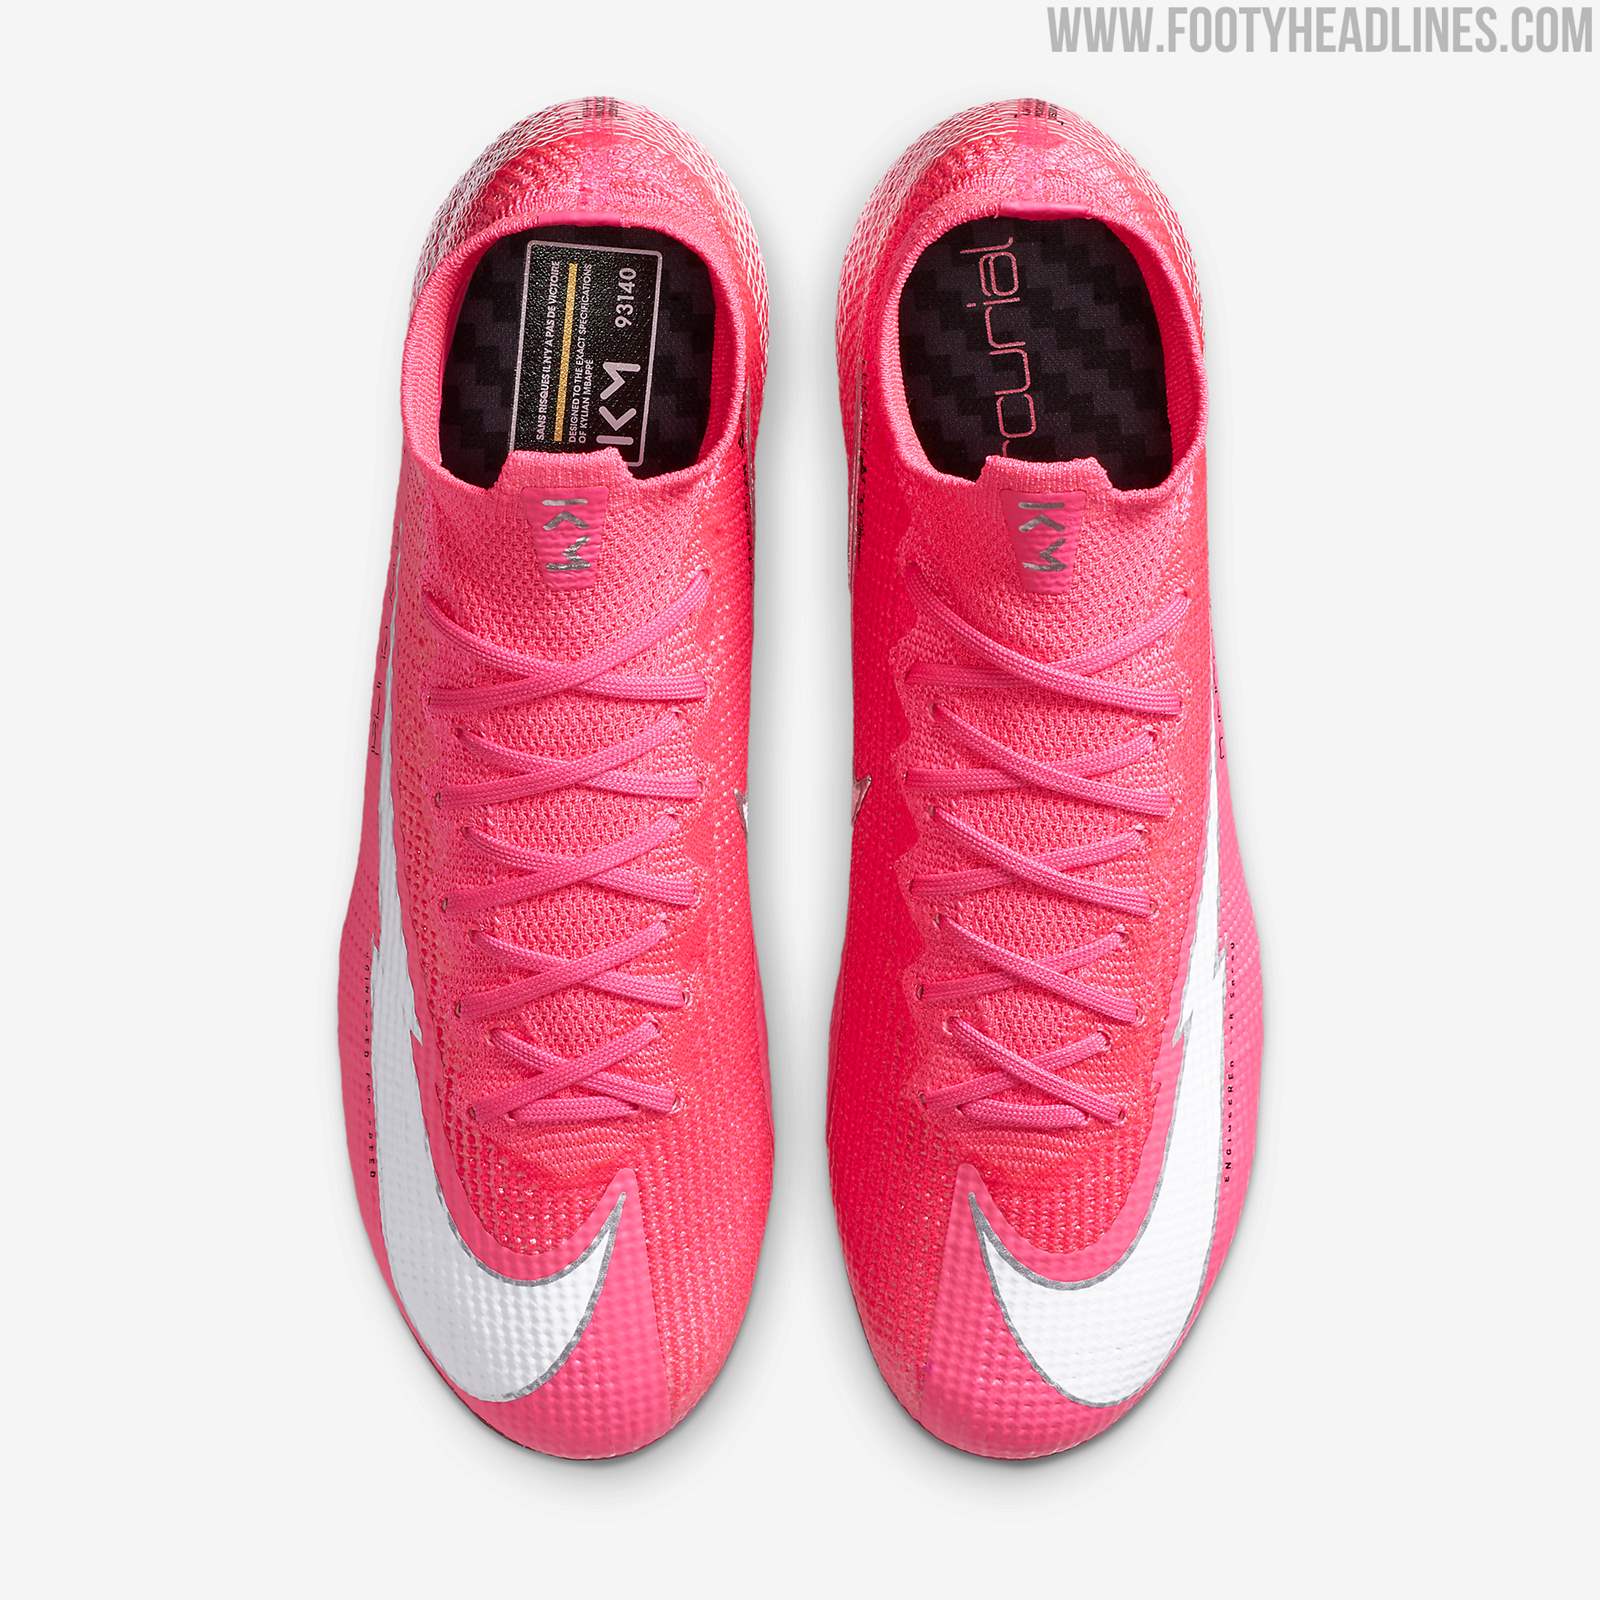 Nike Mercurial Mbappe Rosa Signature Boots - UCL Final Debut - Footy Headlines